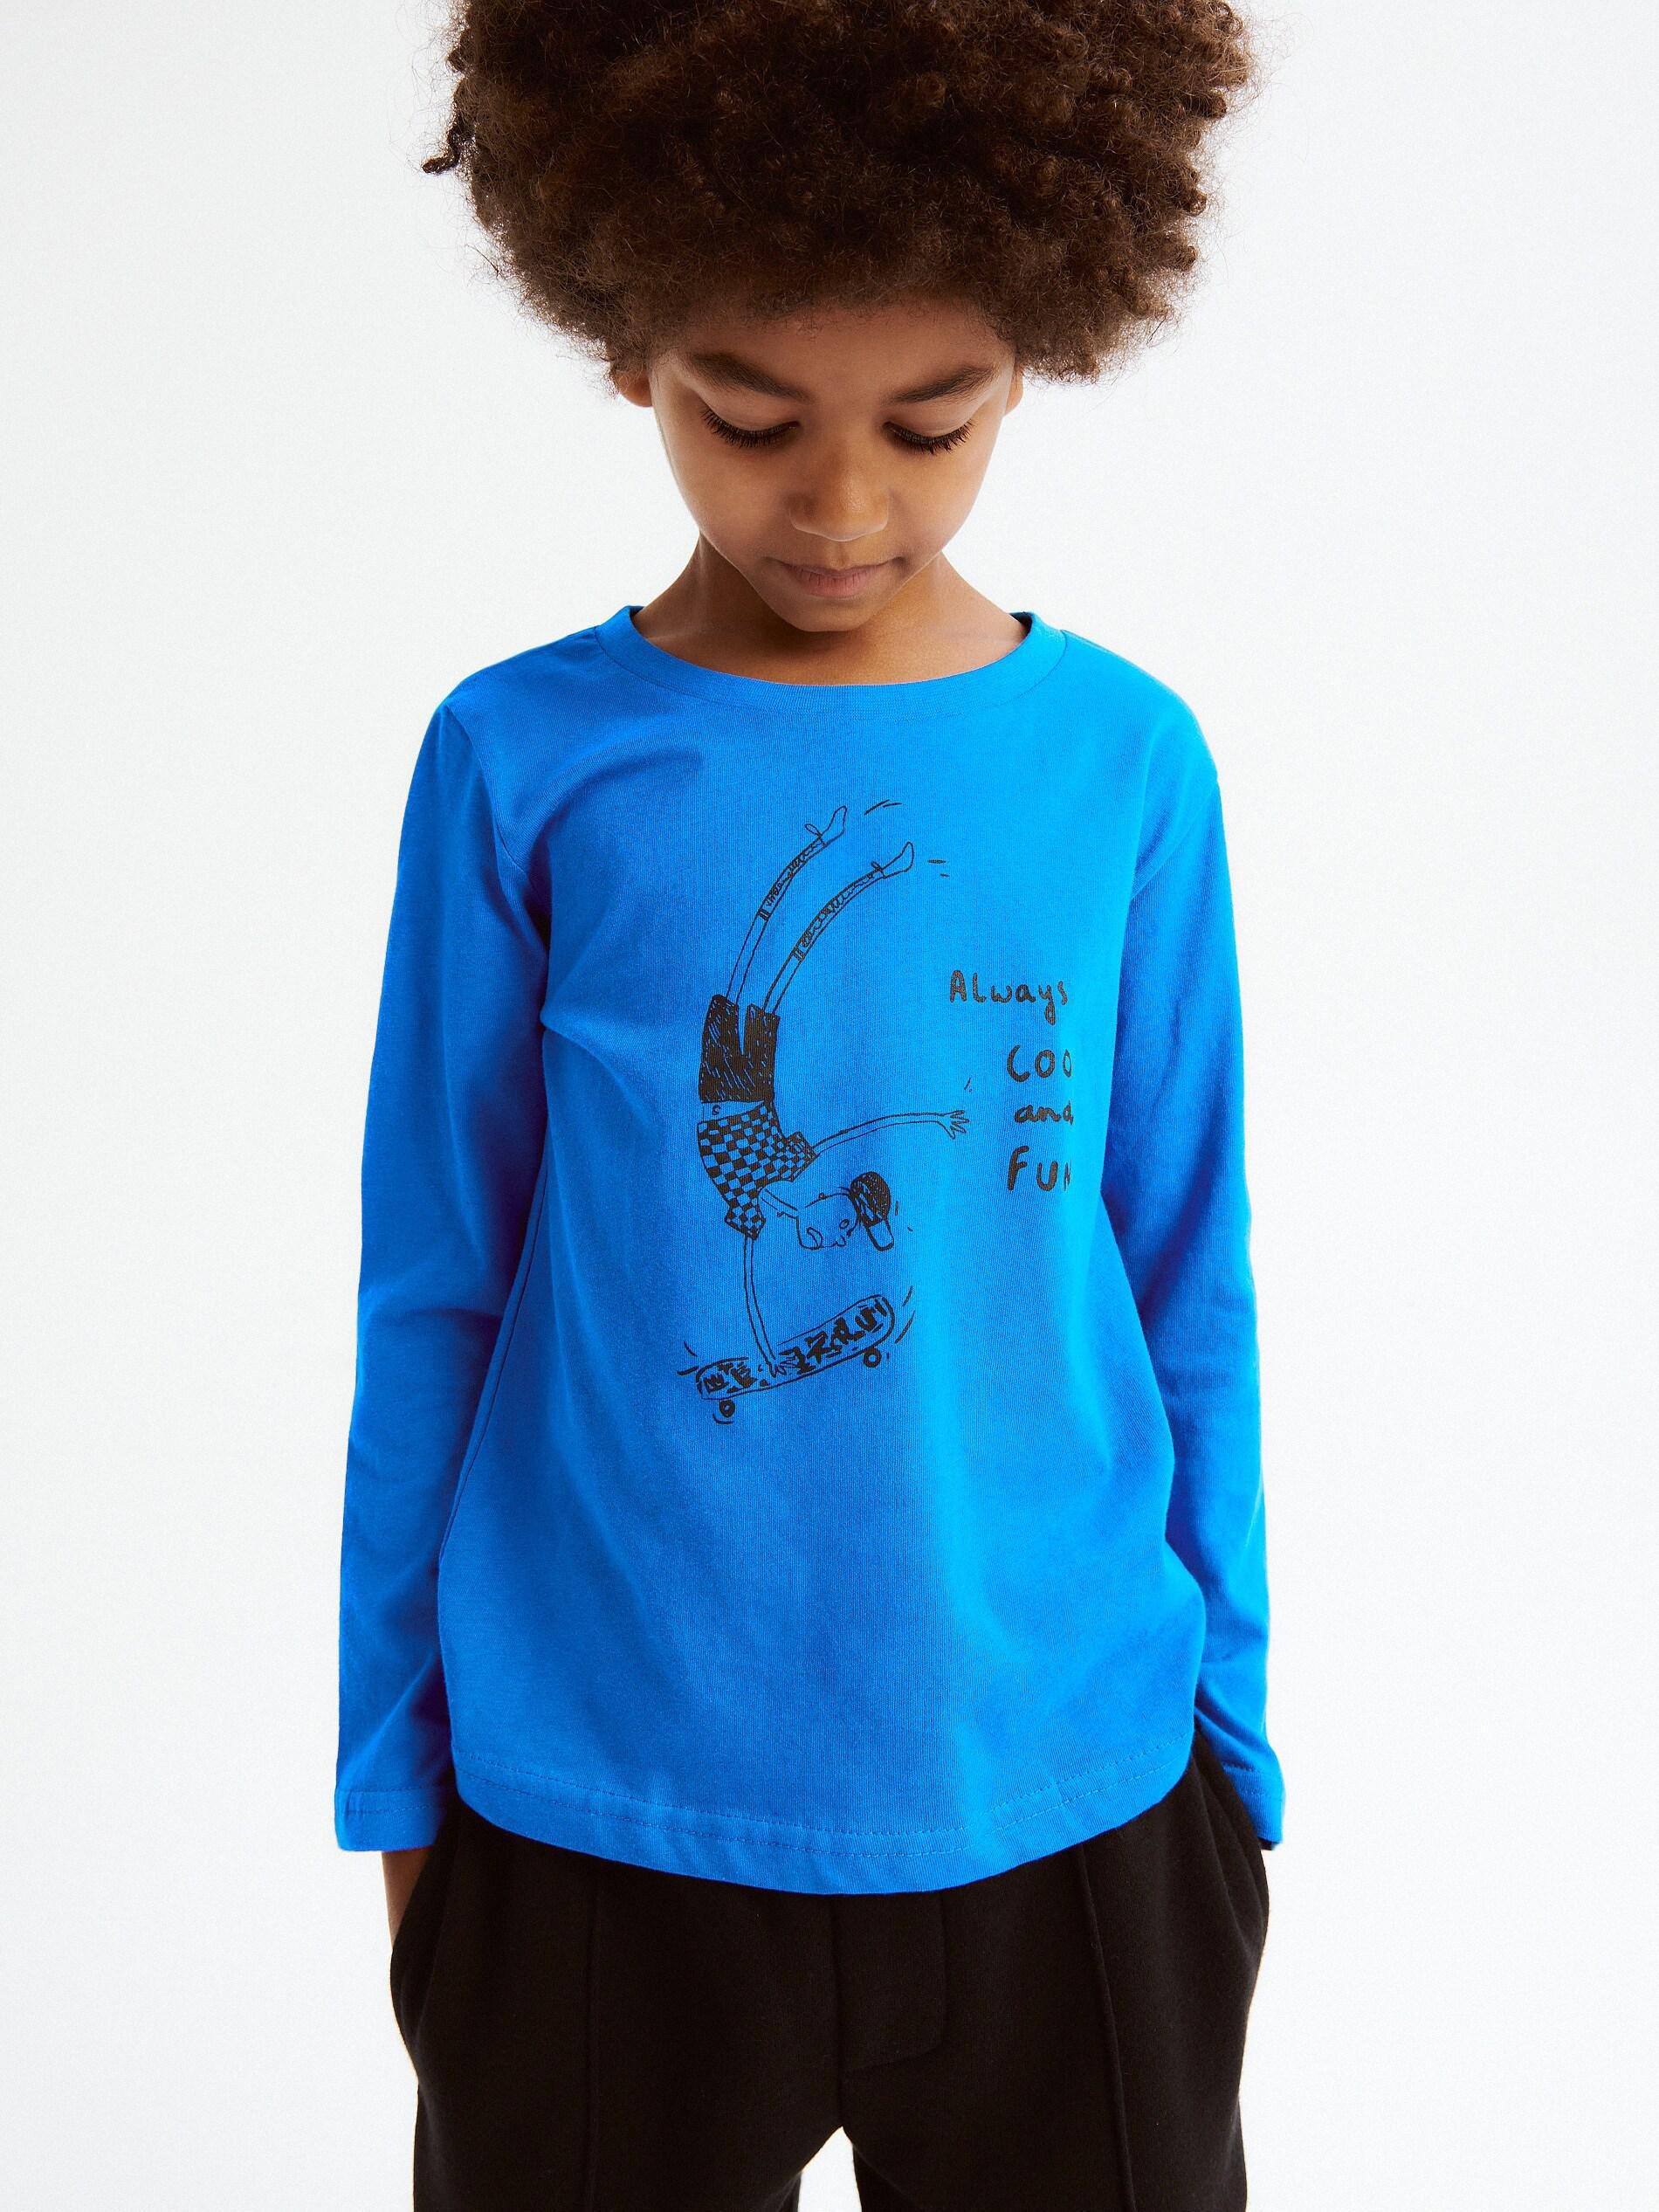 Reserved - Blue Long Sleeve T-Shirt With Print, Kids Boys